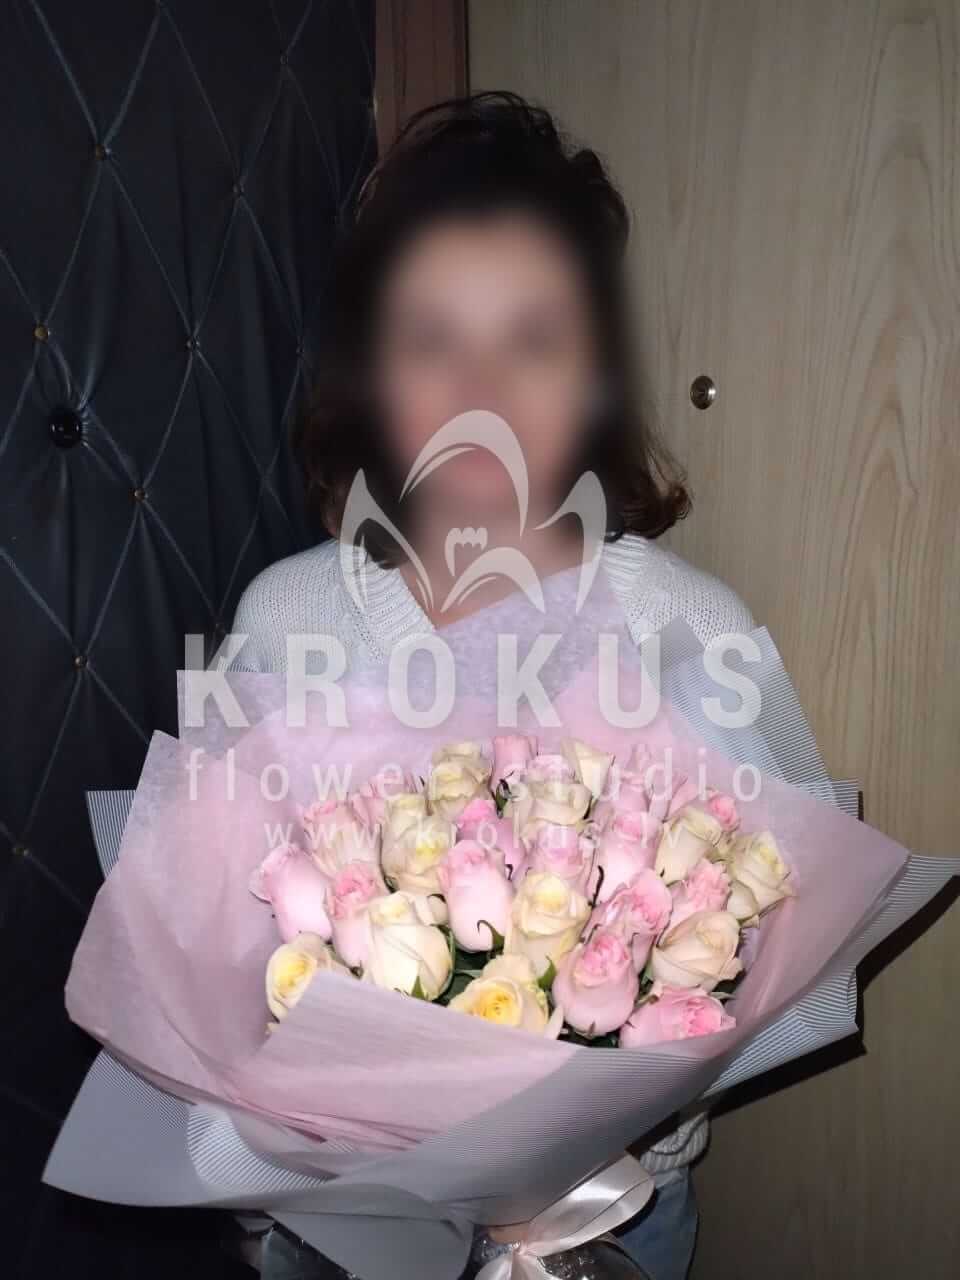 Deliver flowers to Latvia (pink roseswhite roses)